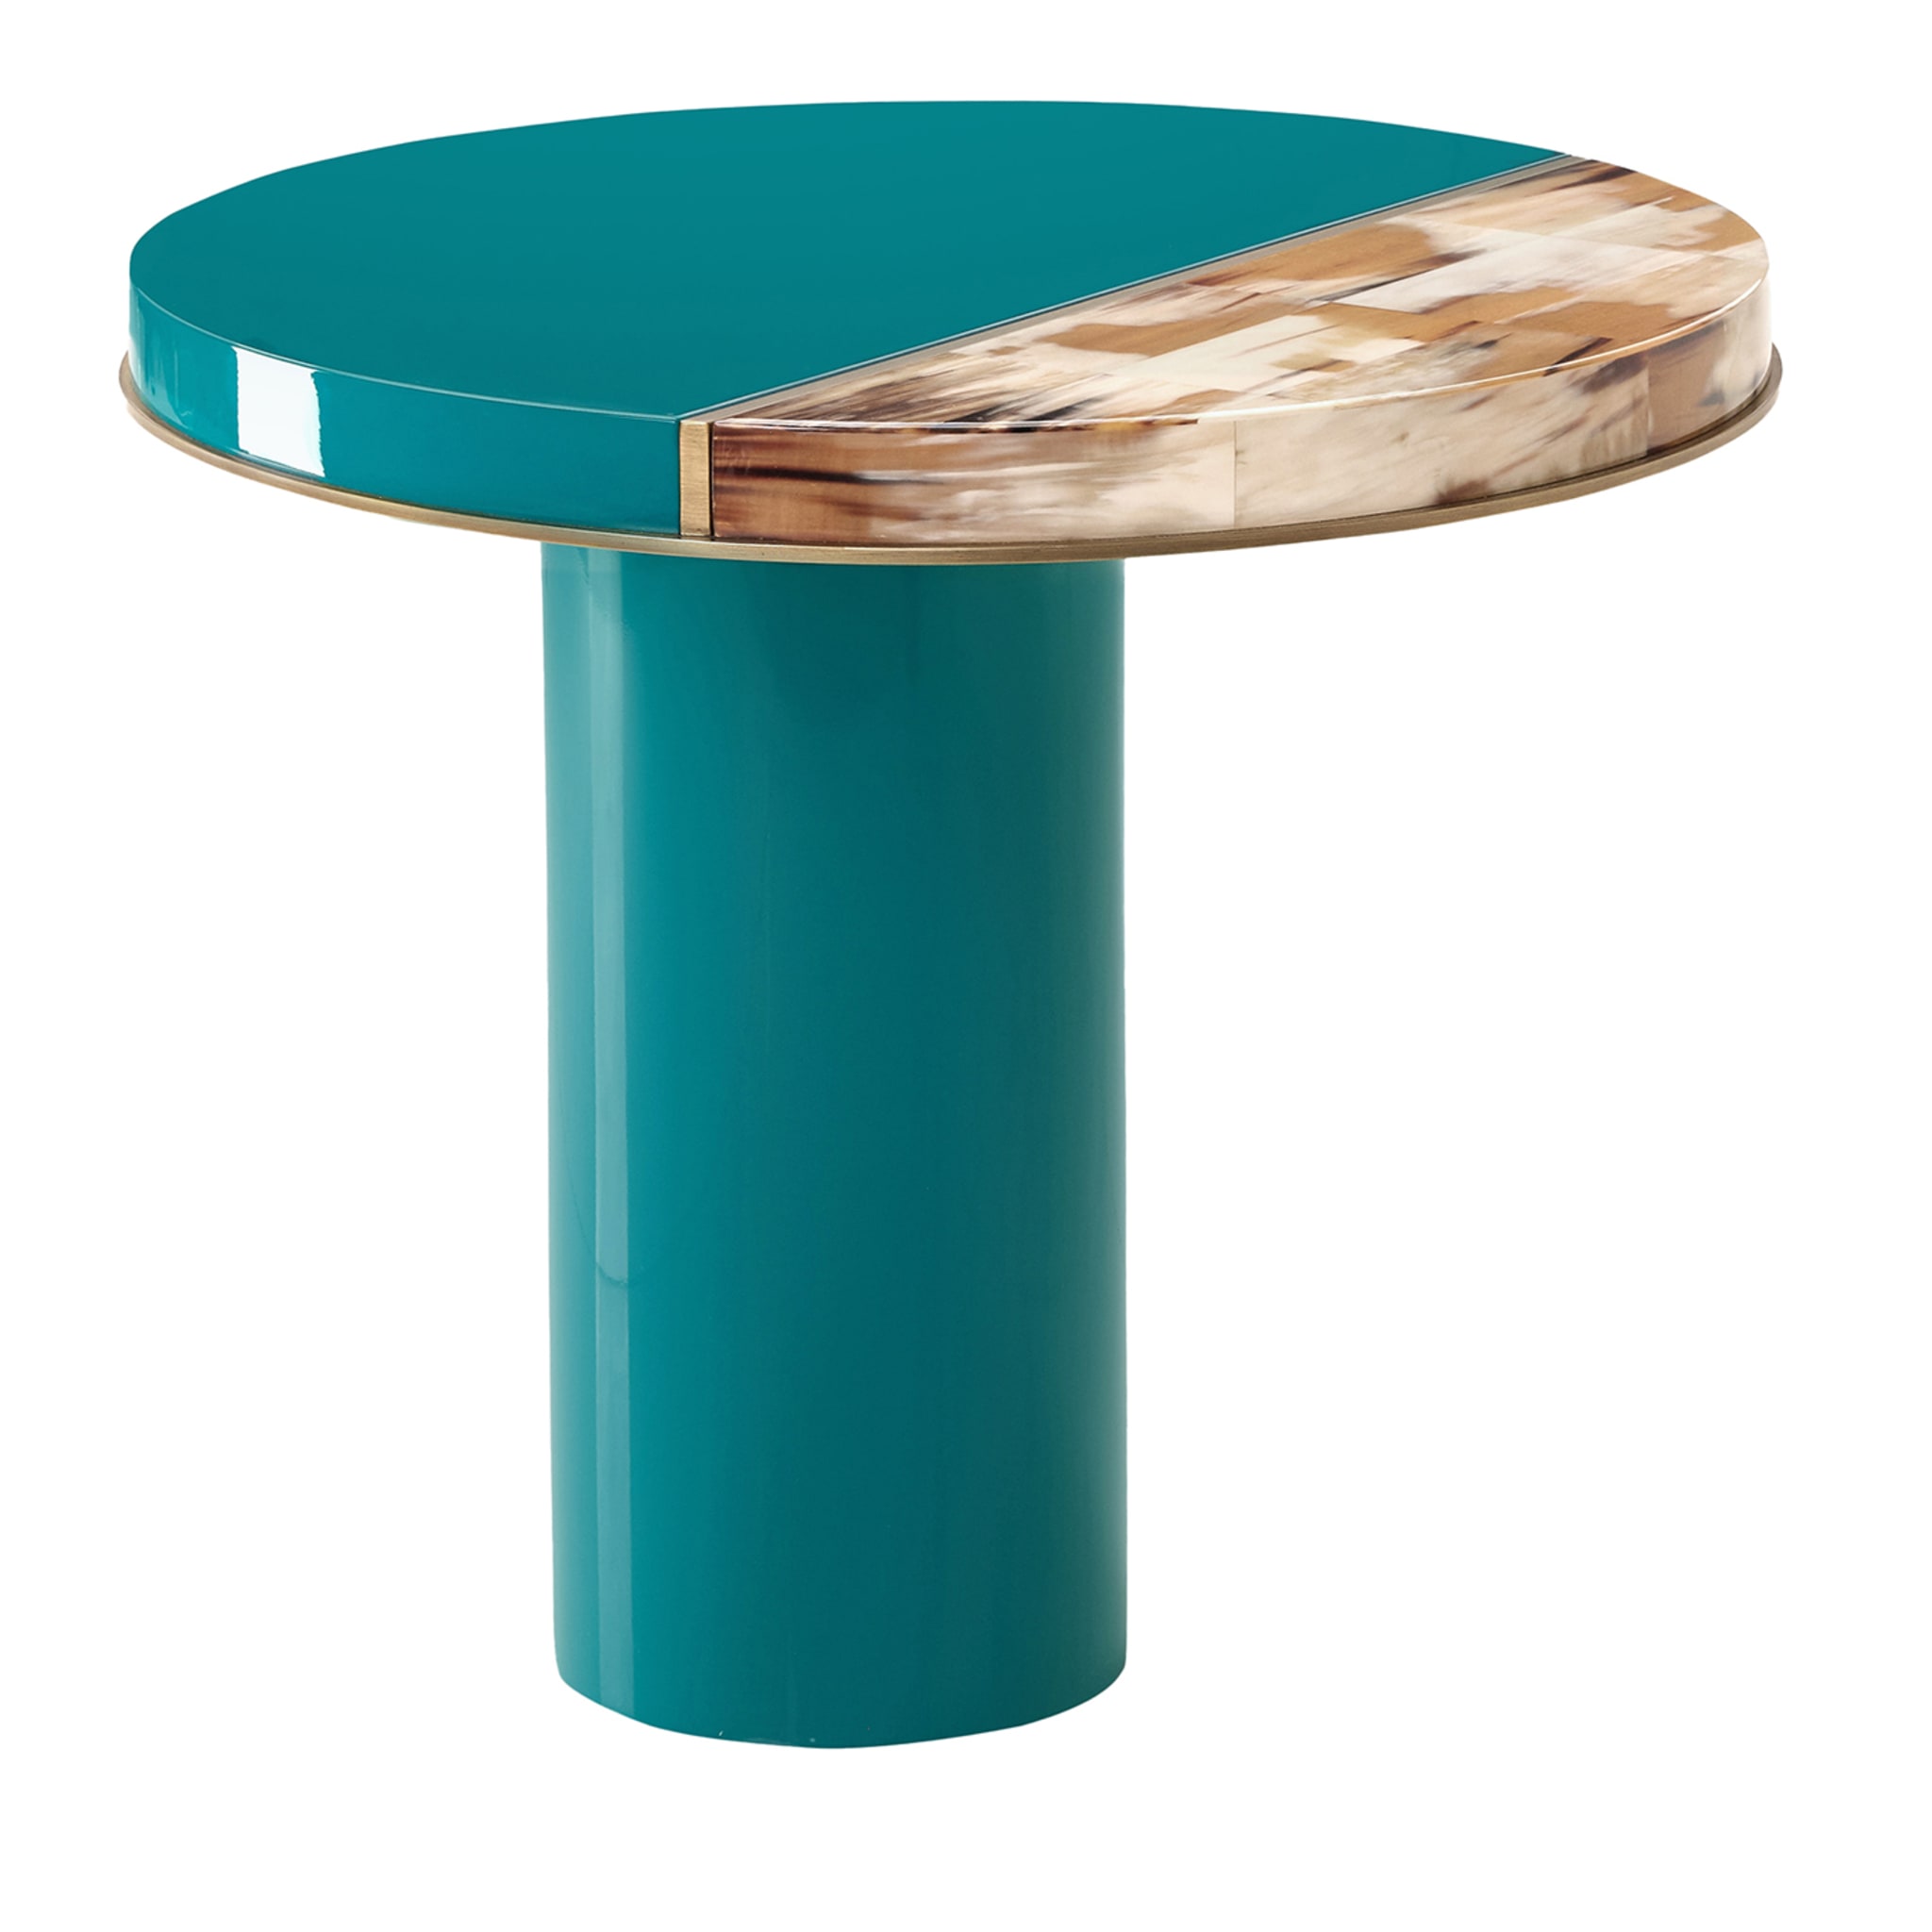 Andria Round Turquoise Side Table - Main view